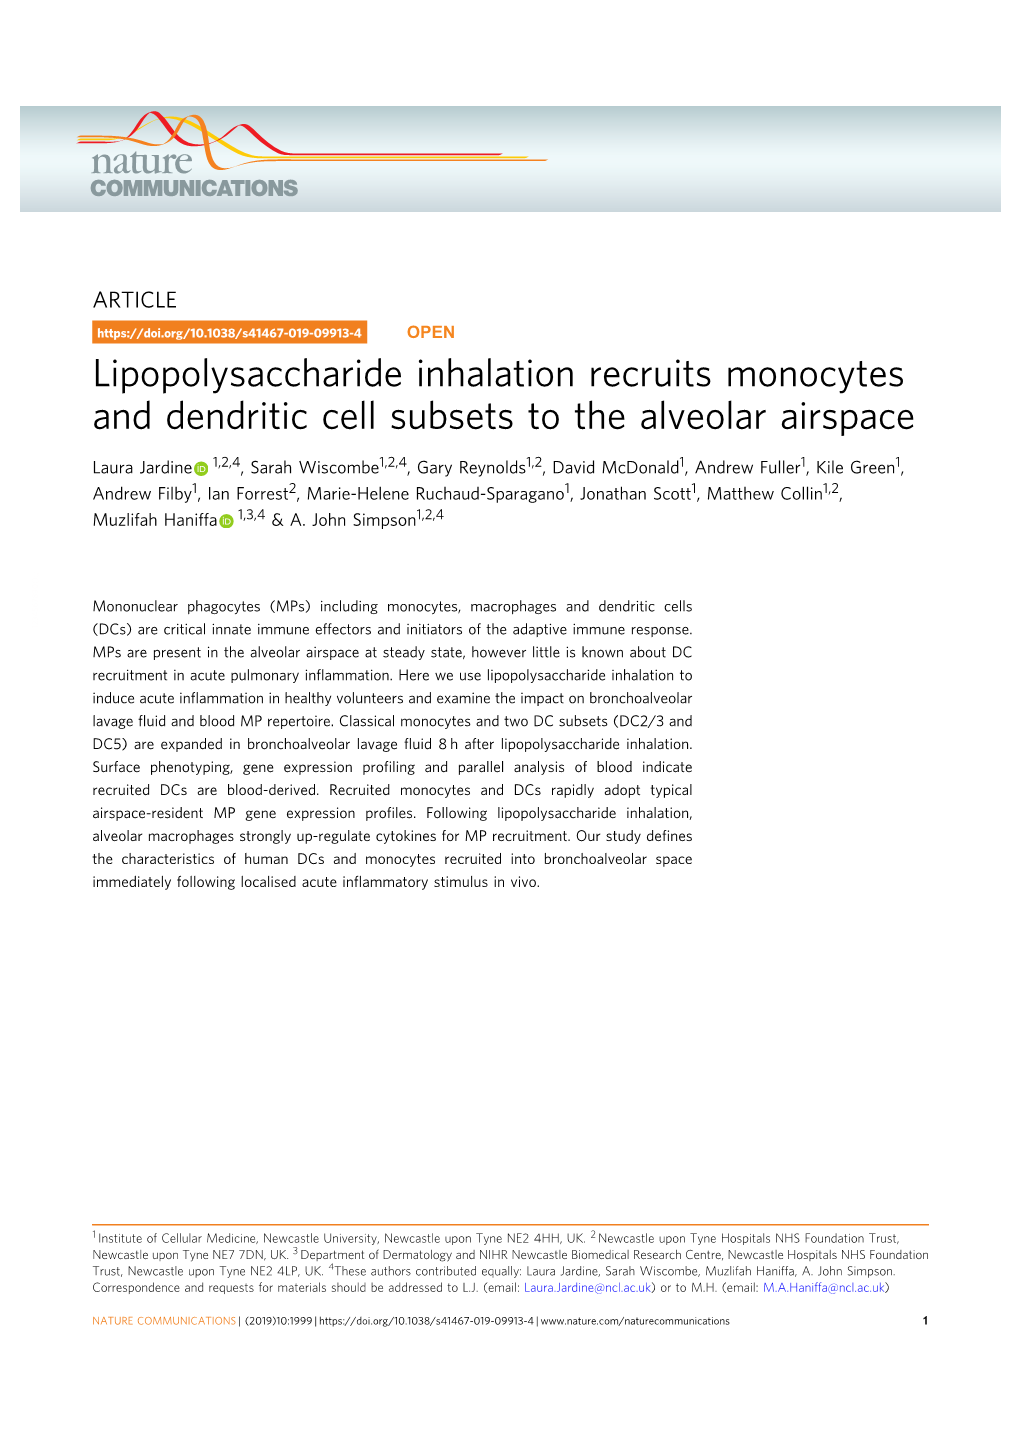 Lipopolysaccharide Inhalation Recruits Monocytes and Dendritic Cell Subsets to the Alveolar Airspace